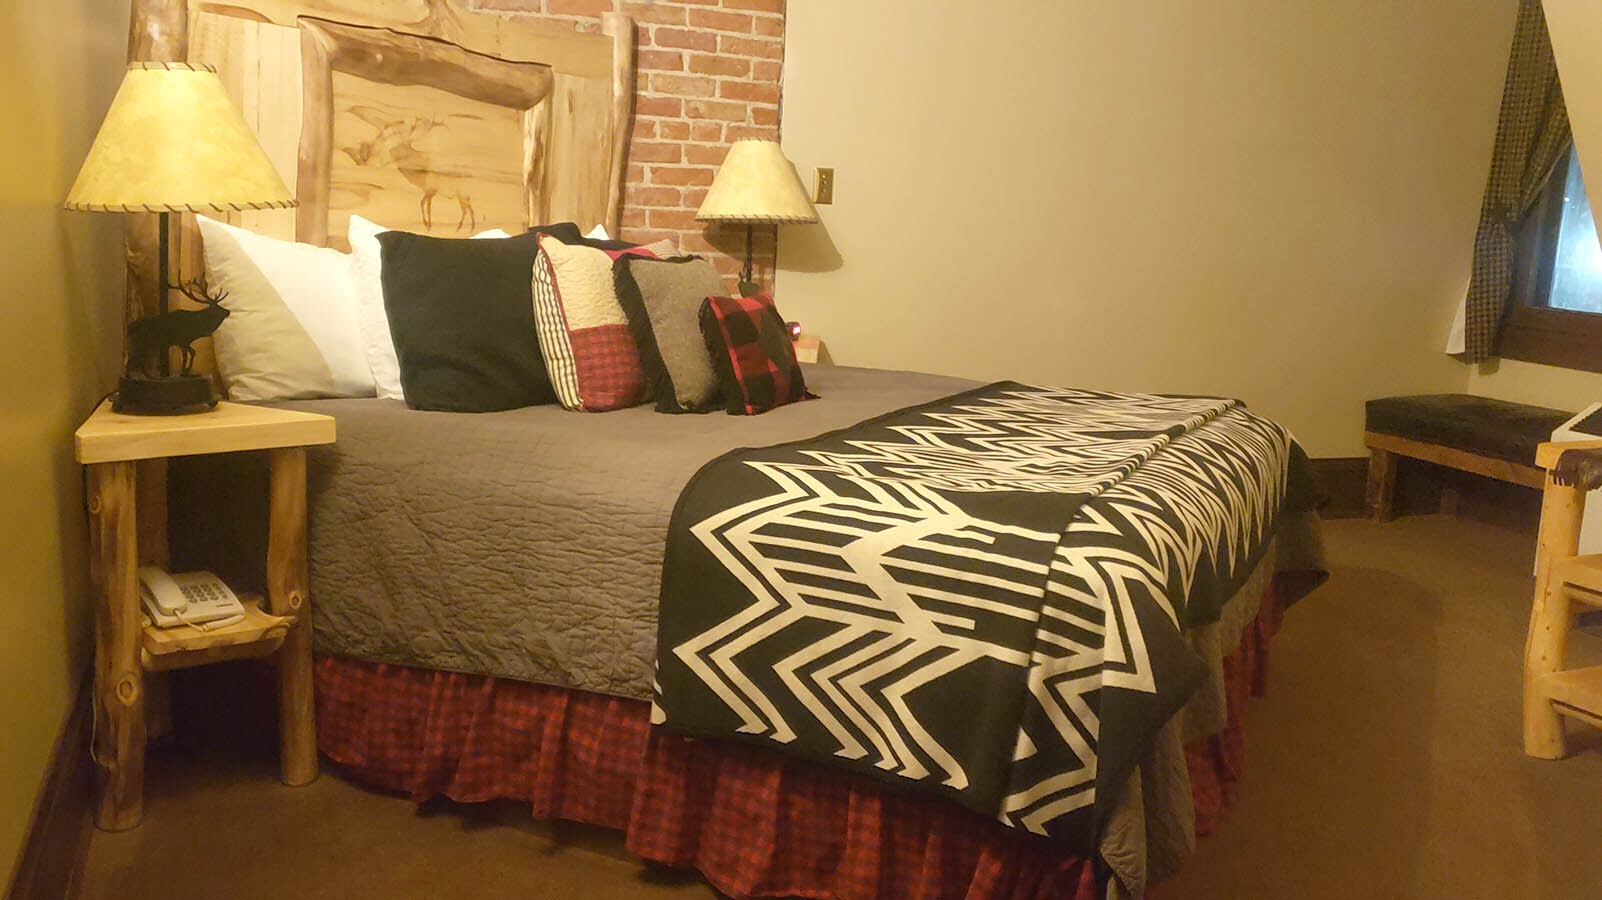 Bed in the Black Elk room shows patterns reminiscent of American Indian motifs and rustic furniture.